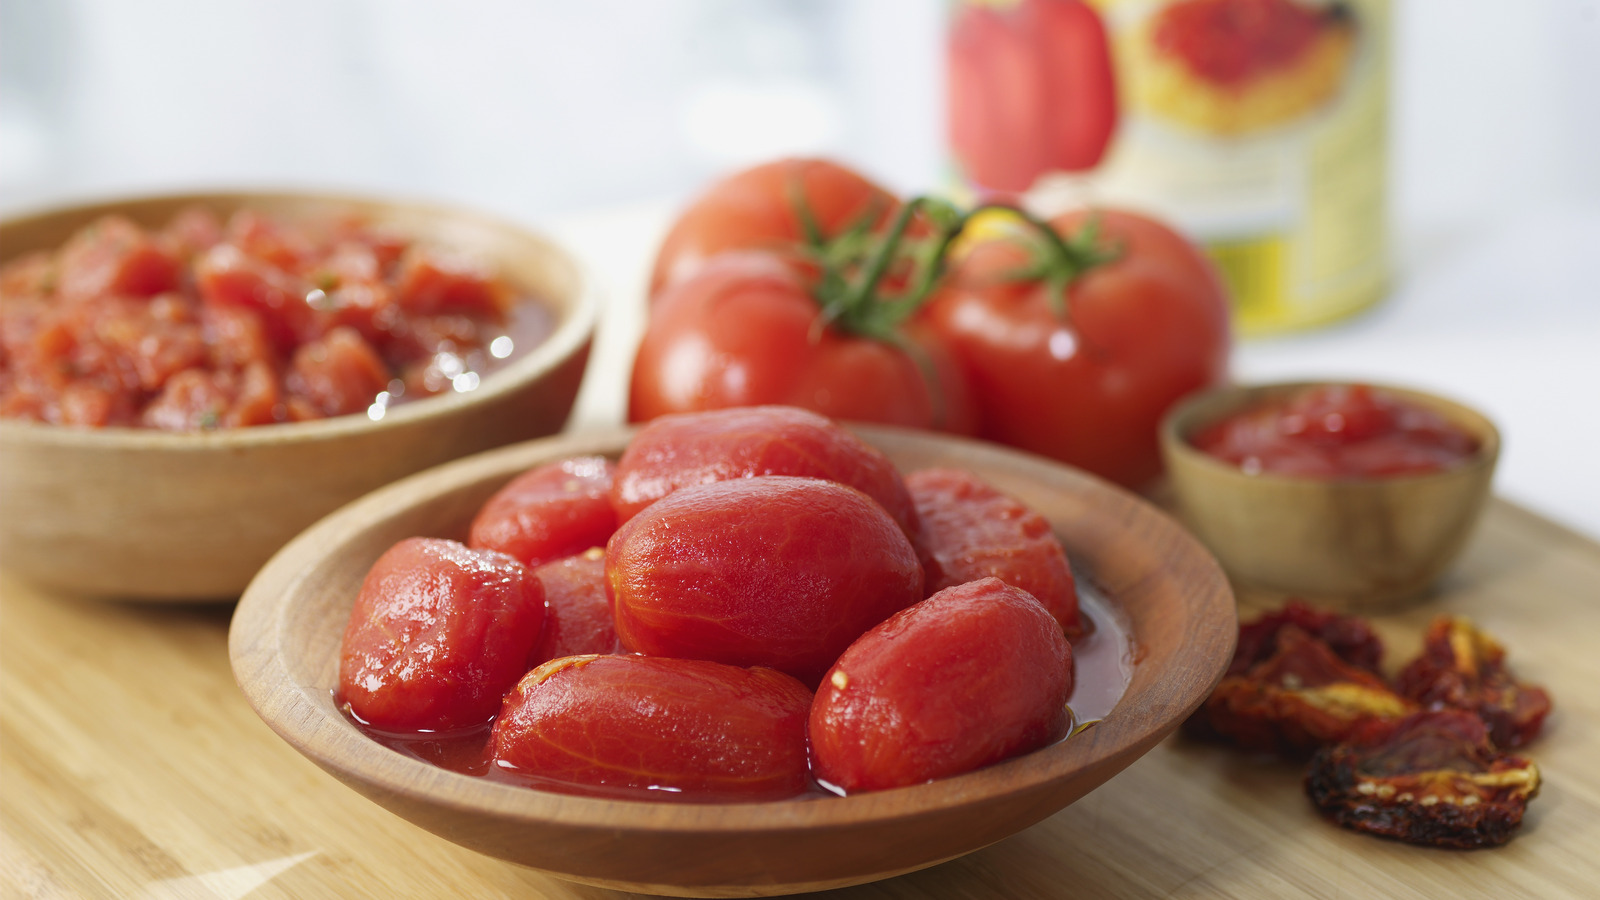 The global Canned Tomato Market is estimated to be rising popularity of tomatoes in various cuisines worldwide